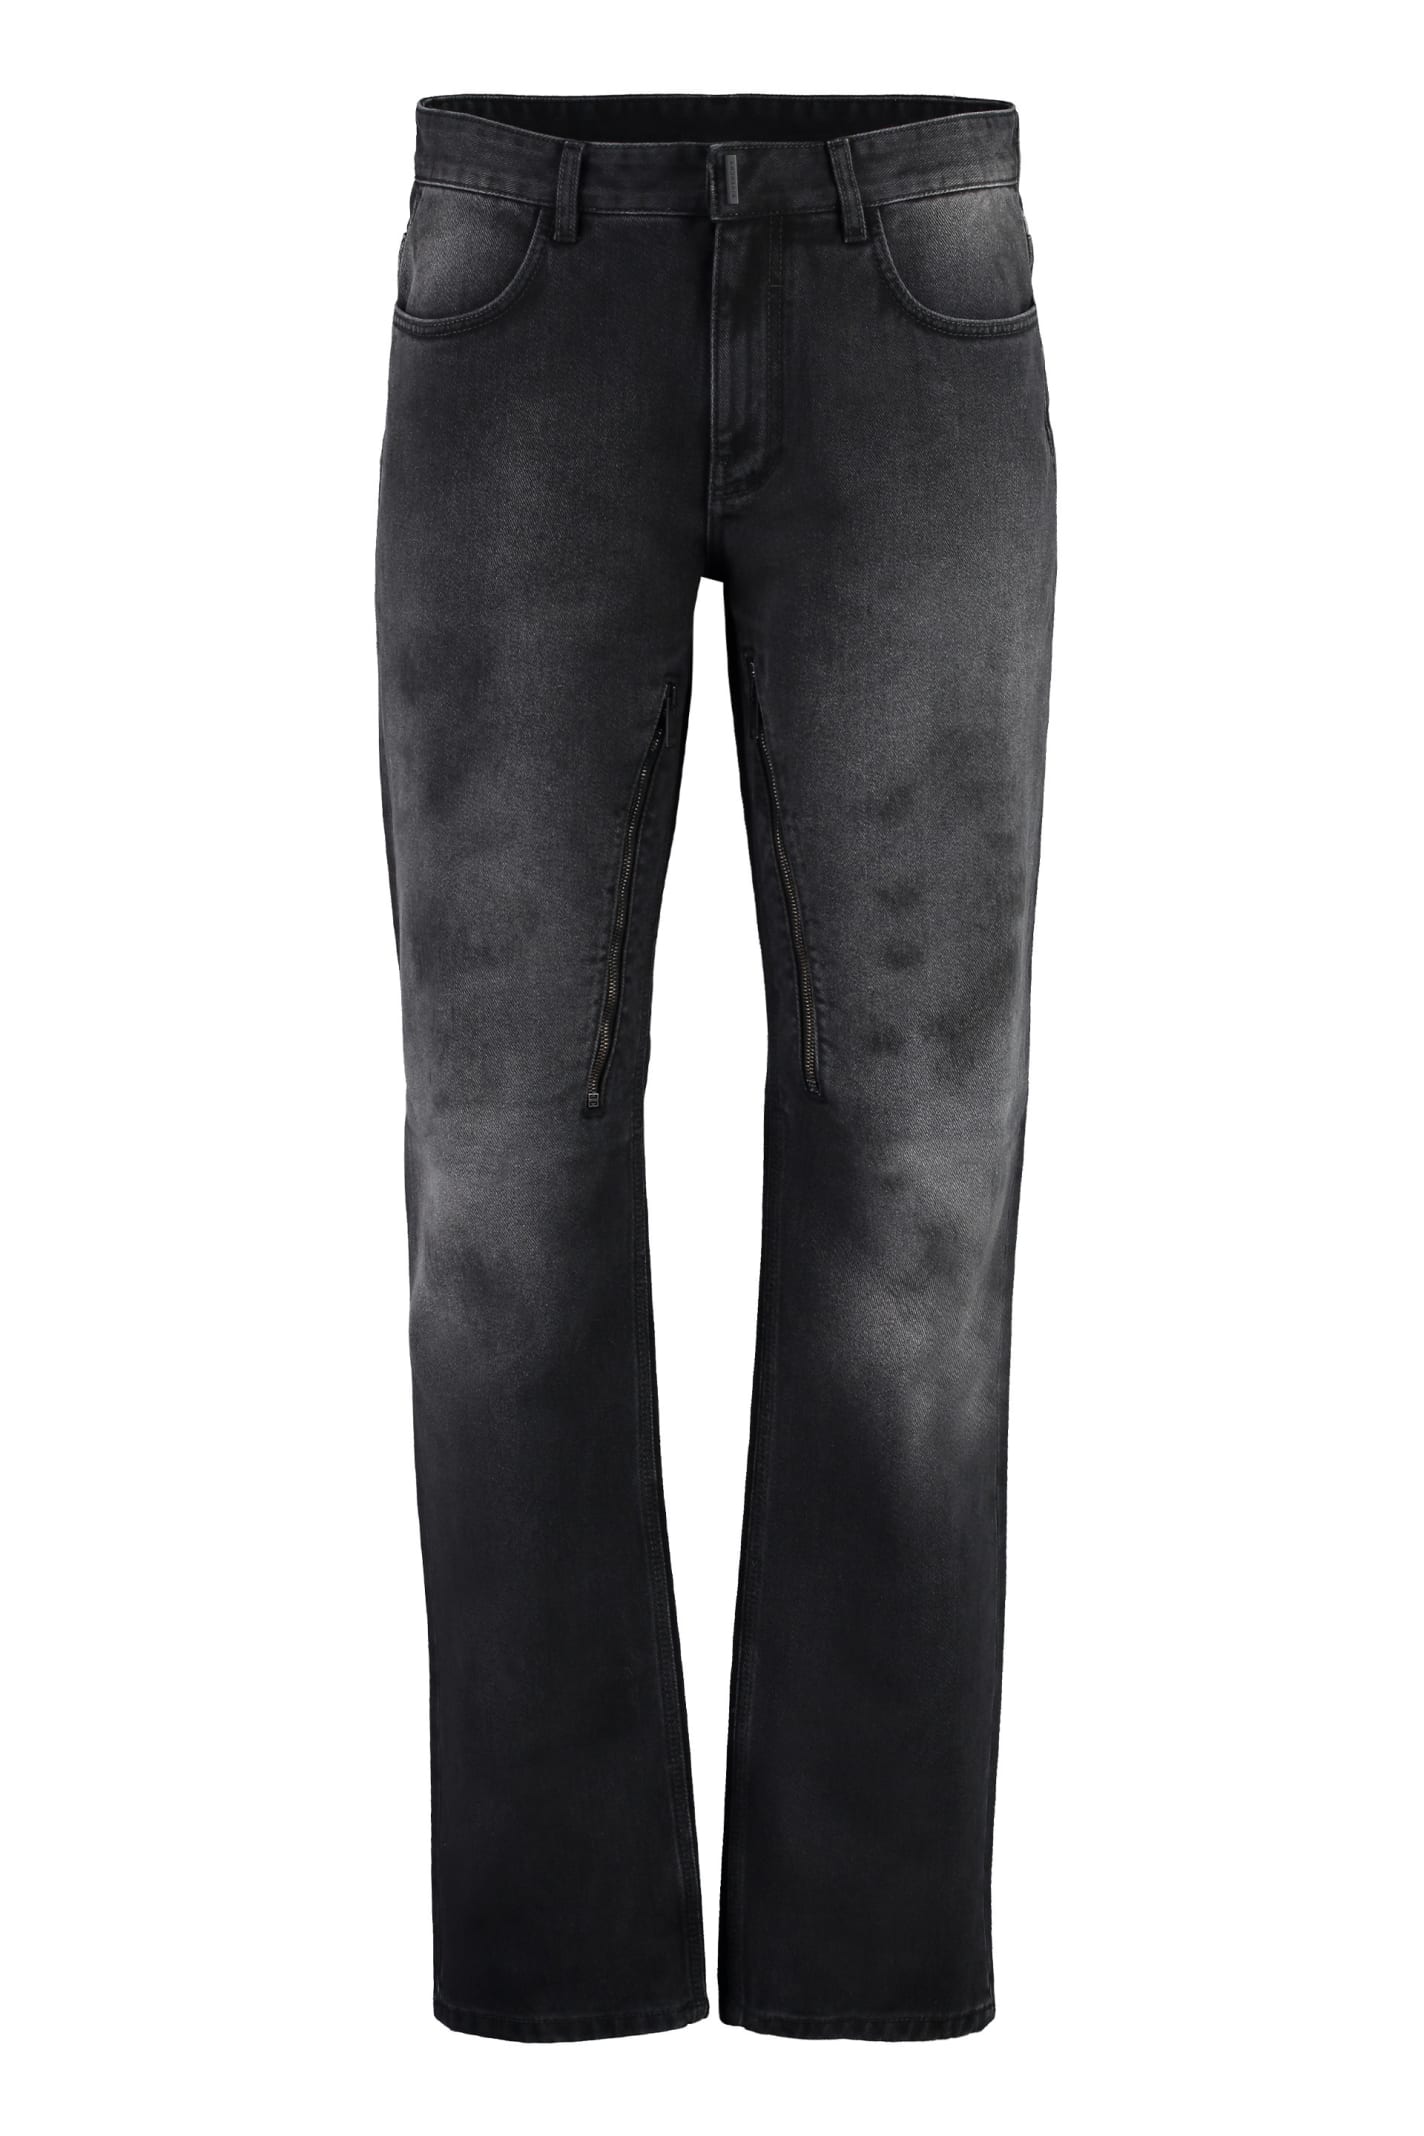 GIVENCHY STRAIGHT LEG JEANS